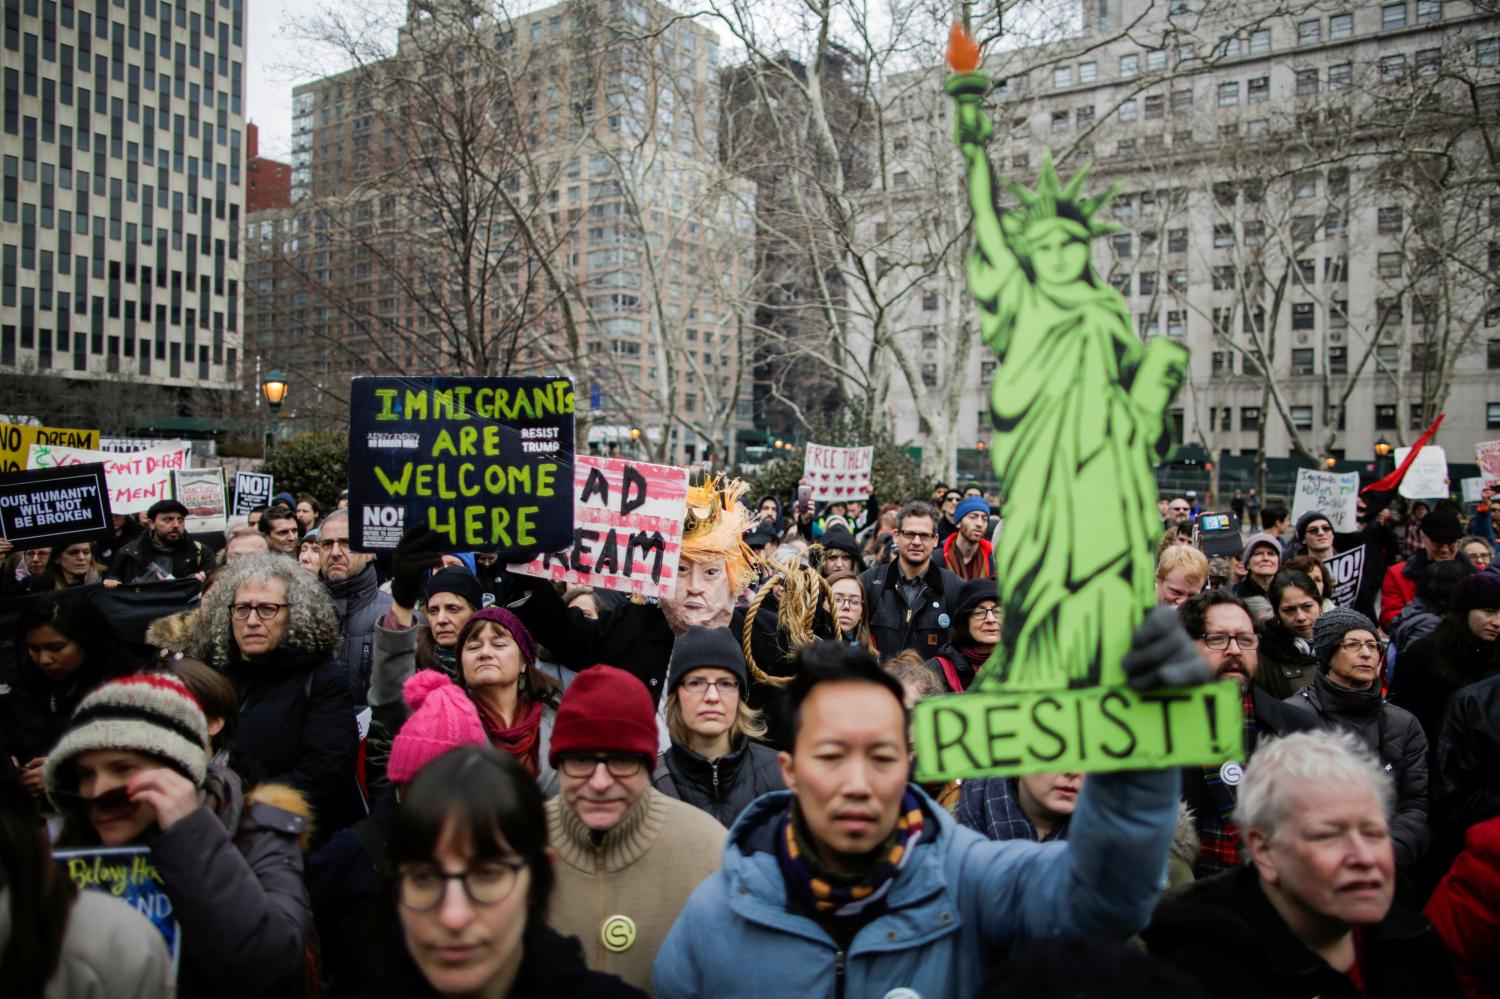 People participate in a protest against U.S. Immigration Policies.